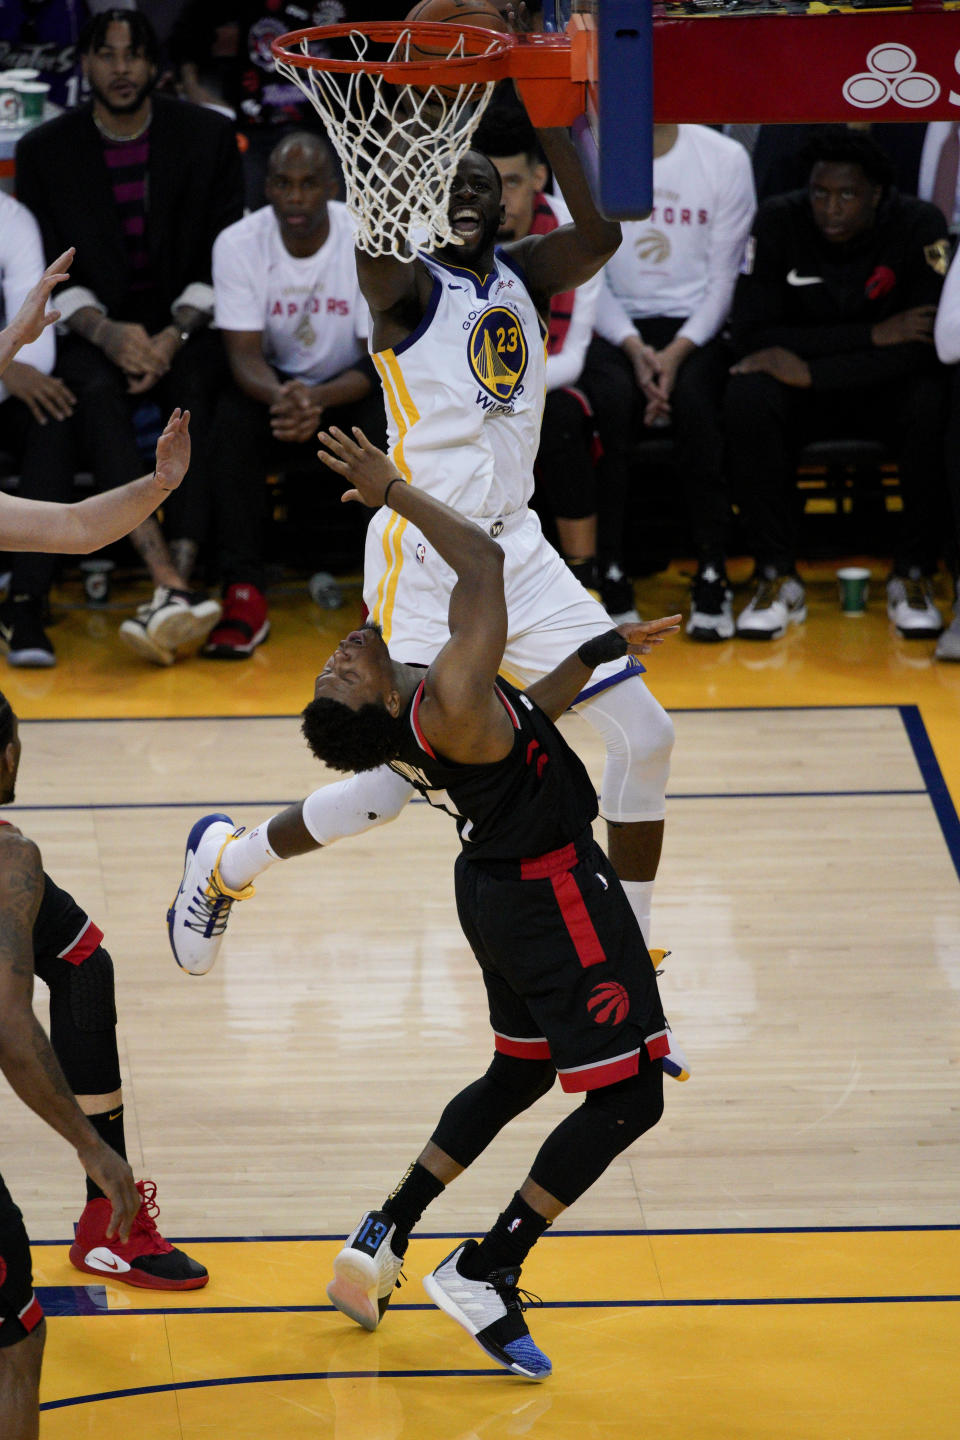 Golden State Warriors forward Draymond Green (23) shoots over Toronto Raptors guard Kyle Lowry during the first half of Game 3 of basketball's NBA Finals in Oakland, Calif., Wednesday, June 5, 2019. (AP Photo/Tony Avelar)